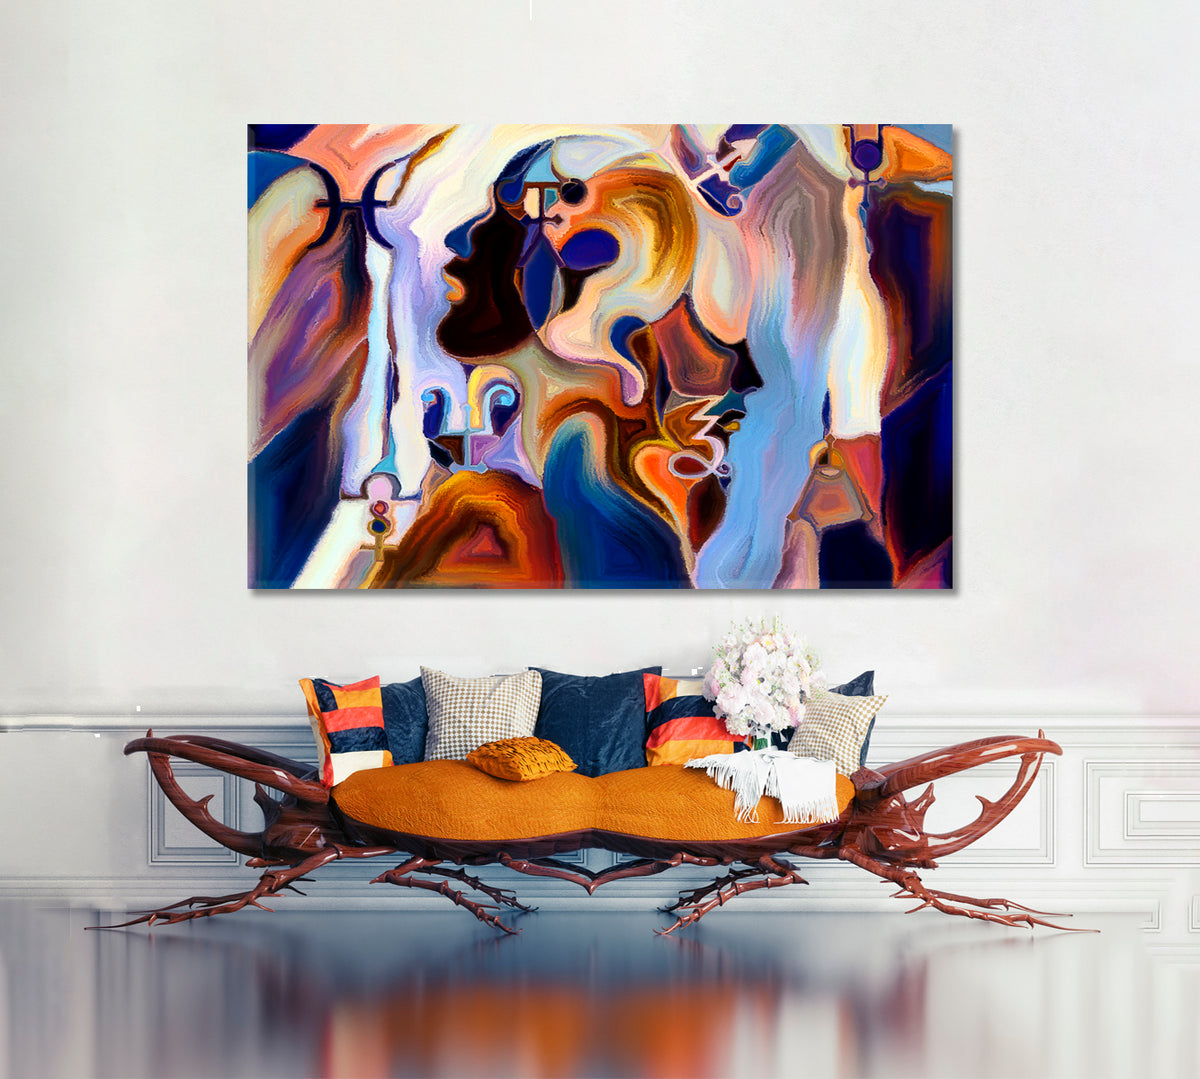 Chasing the Dream Abstract Art Print Artesty 1 panel 24" x 16" 